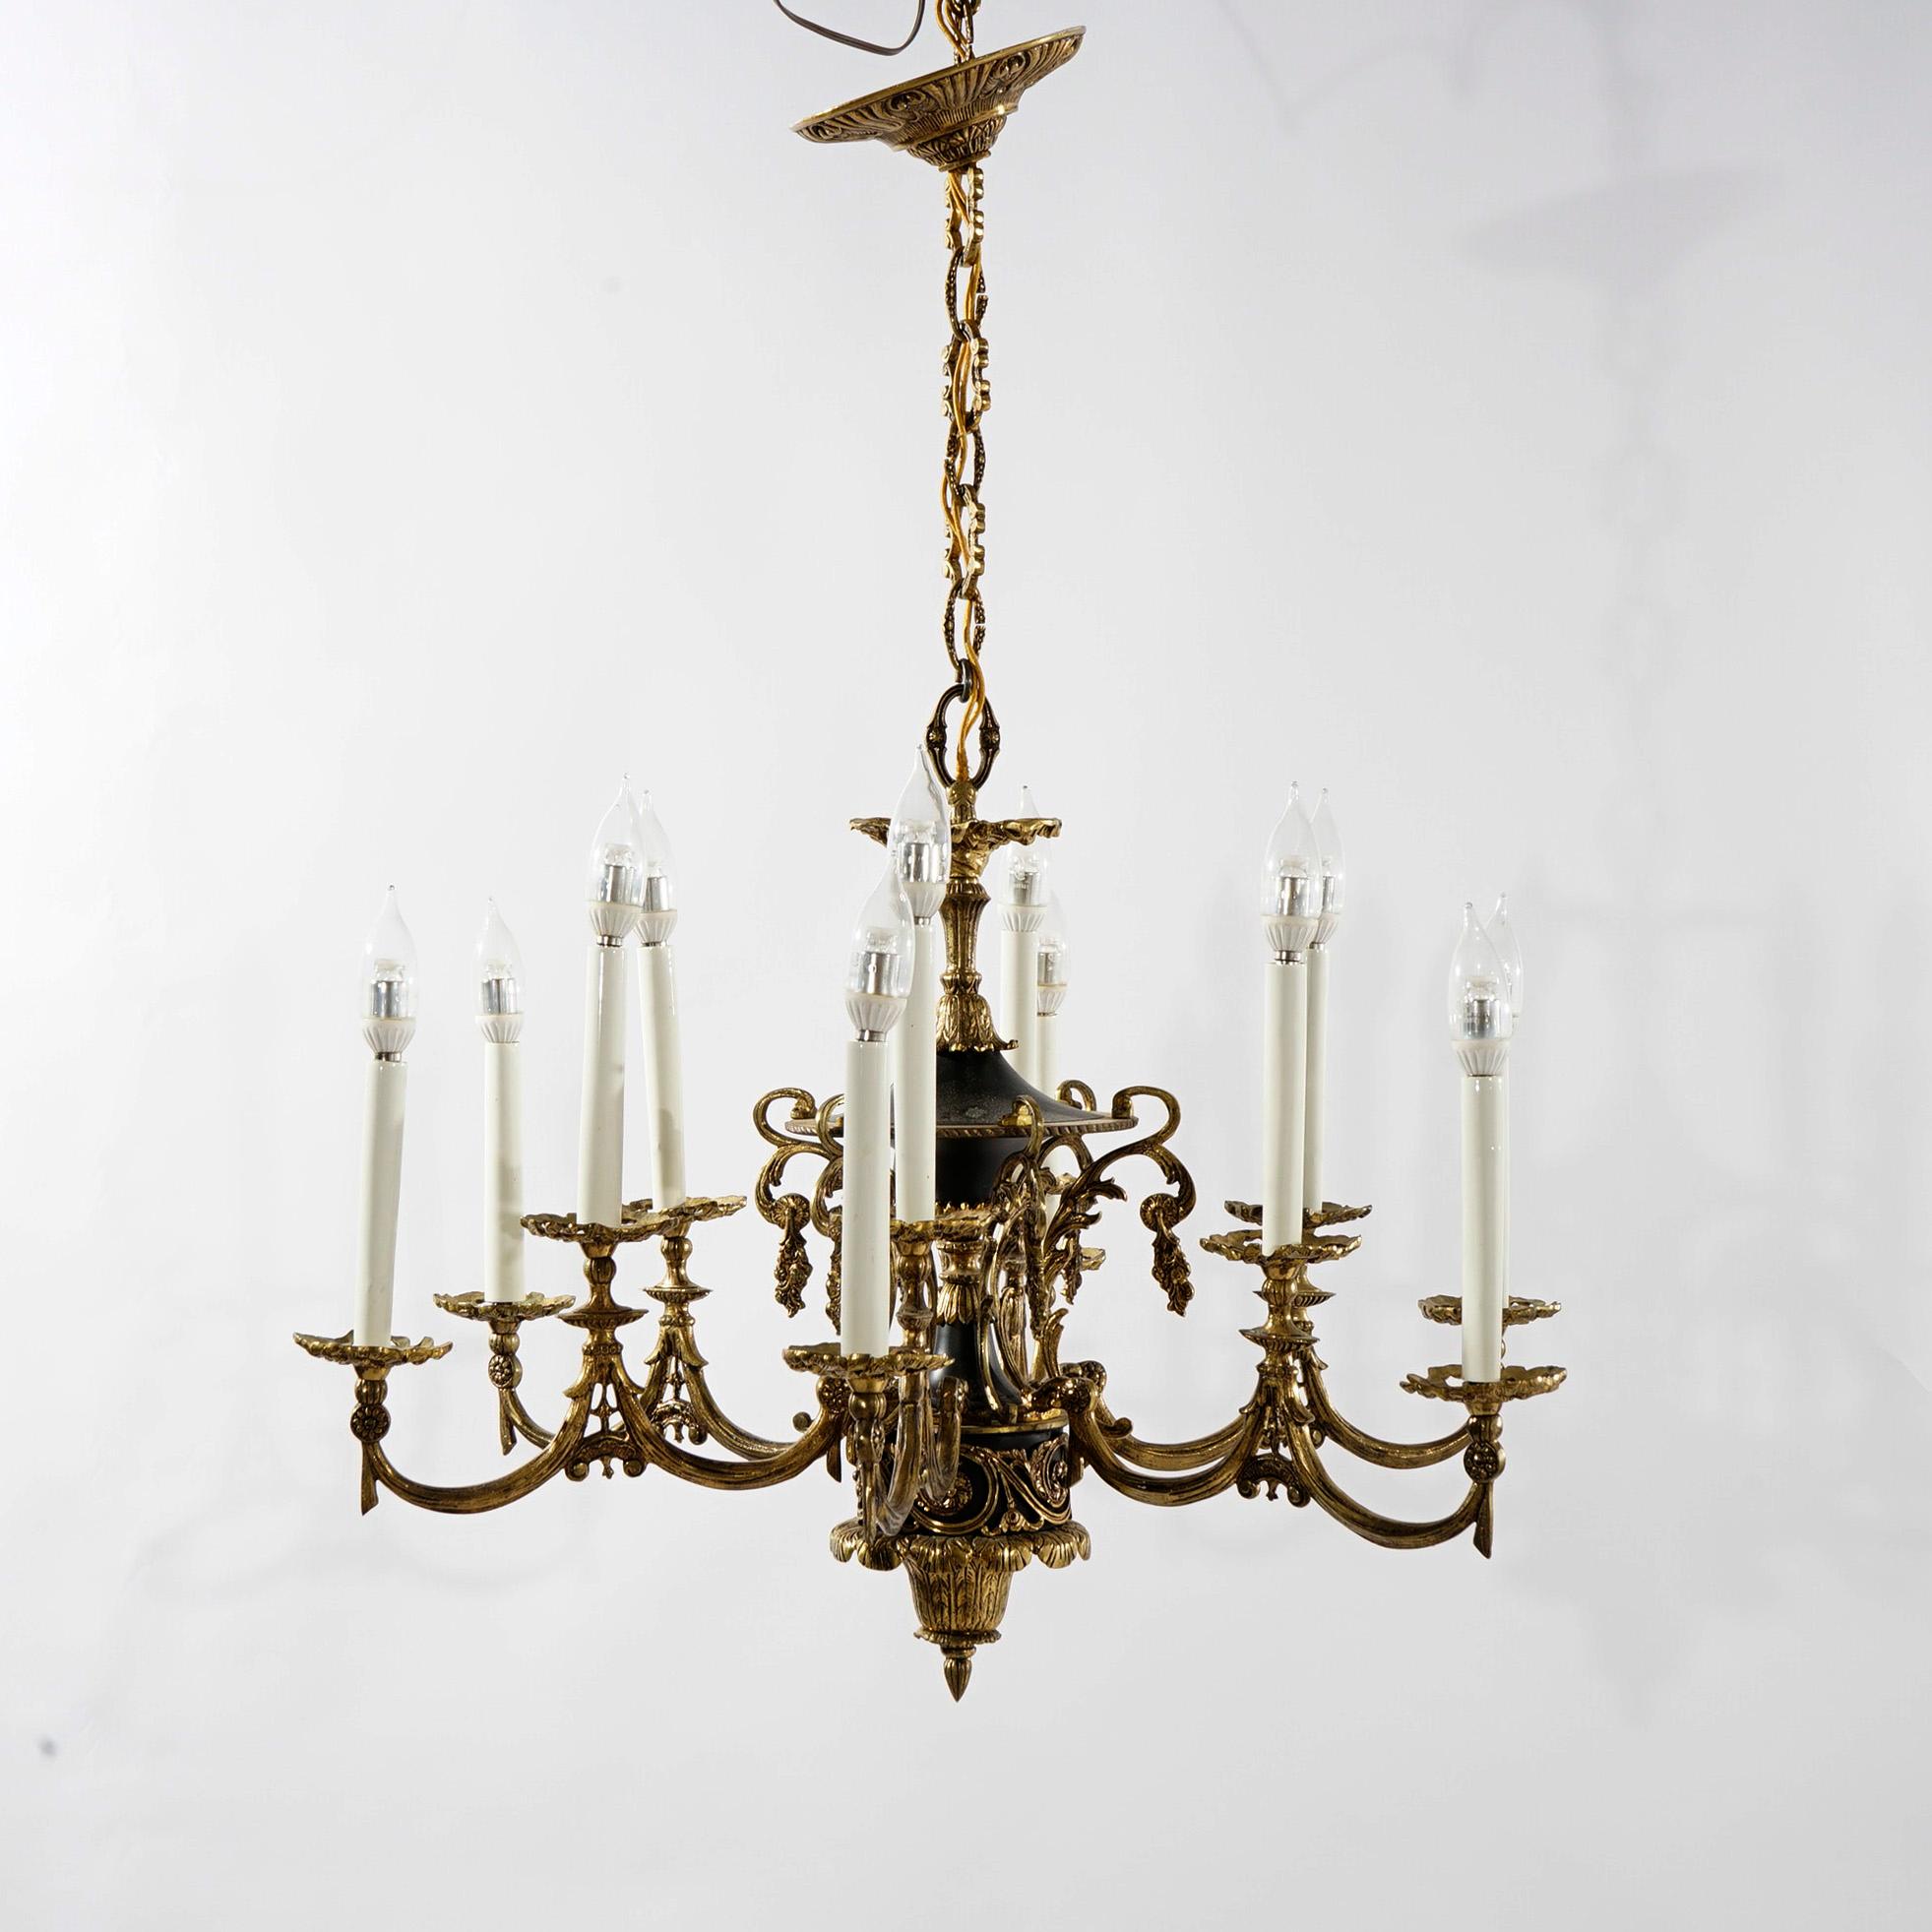 American Antique French Empire Style Ebonized Bronze Twelve-Light Chandelier, Early 20thC For Sale